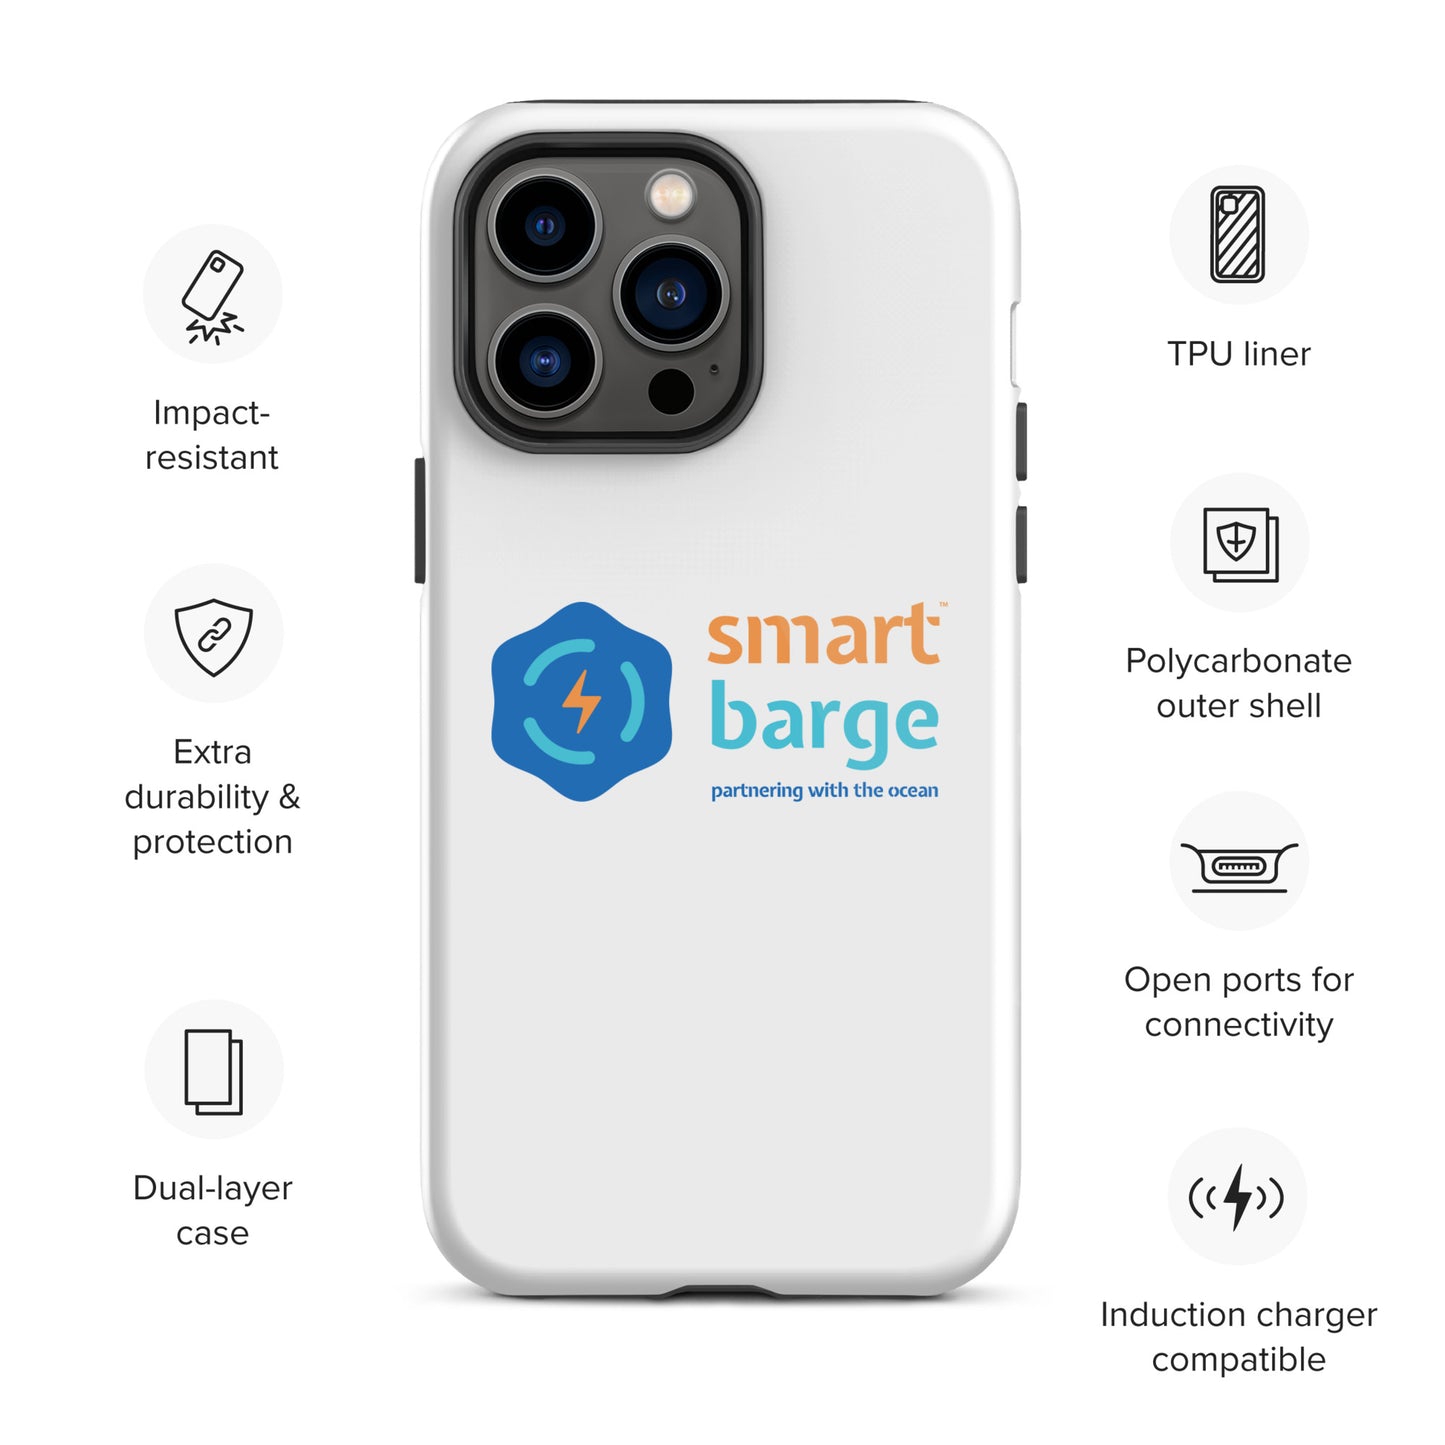 Smart Barge 'Partnering With The Ocean' Phone Case